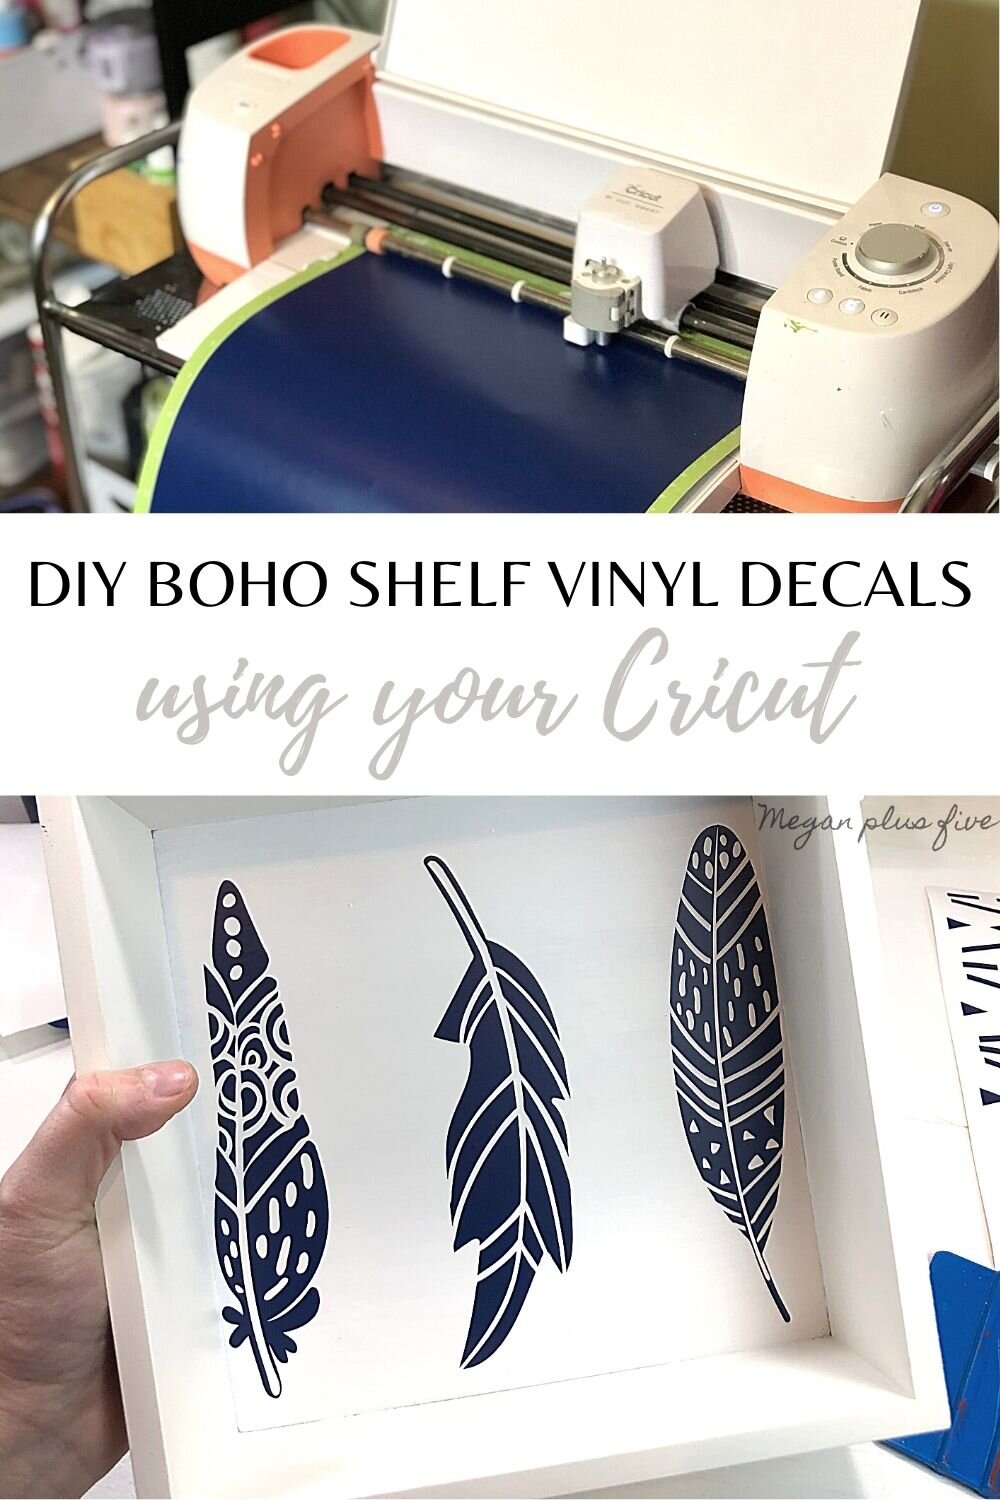 DIY boho shelf decals using your Cricut. How to makeover outdated floating cub shelves for a boho inspired bedroom. Feather, arrow, and geometric shapes for bohemian style home decor.